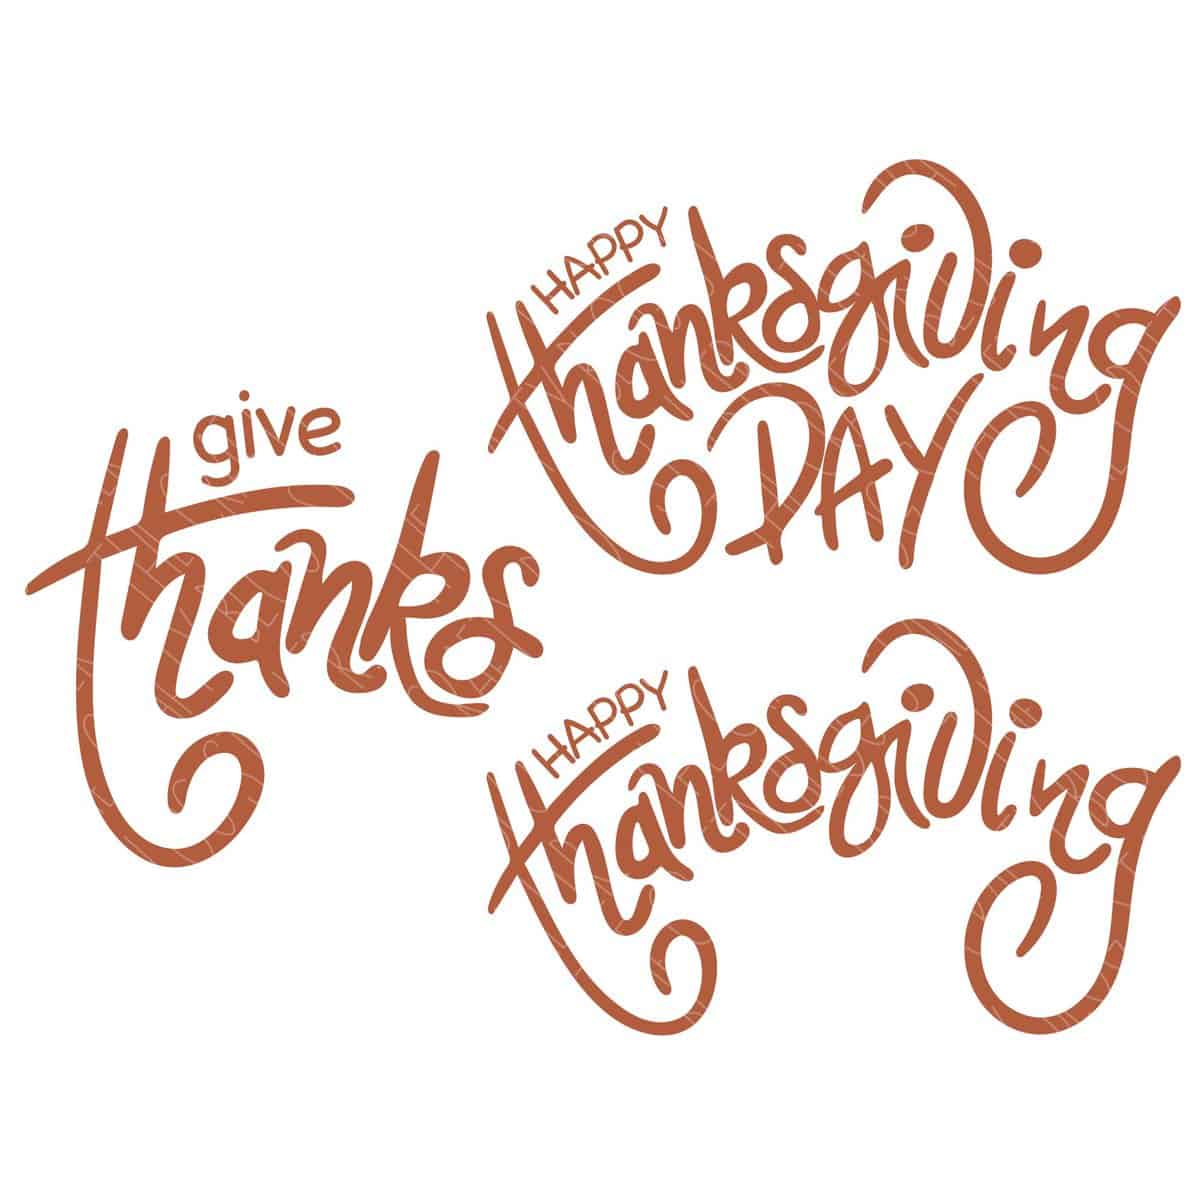 Give Thanks Happy Thanksgiving SVG	

			
		
	

		
			$3.00 – Buy Now Checkout
							
					
						
							
						
						Added to cart